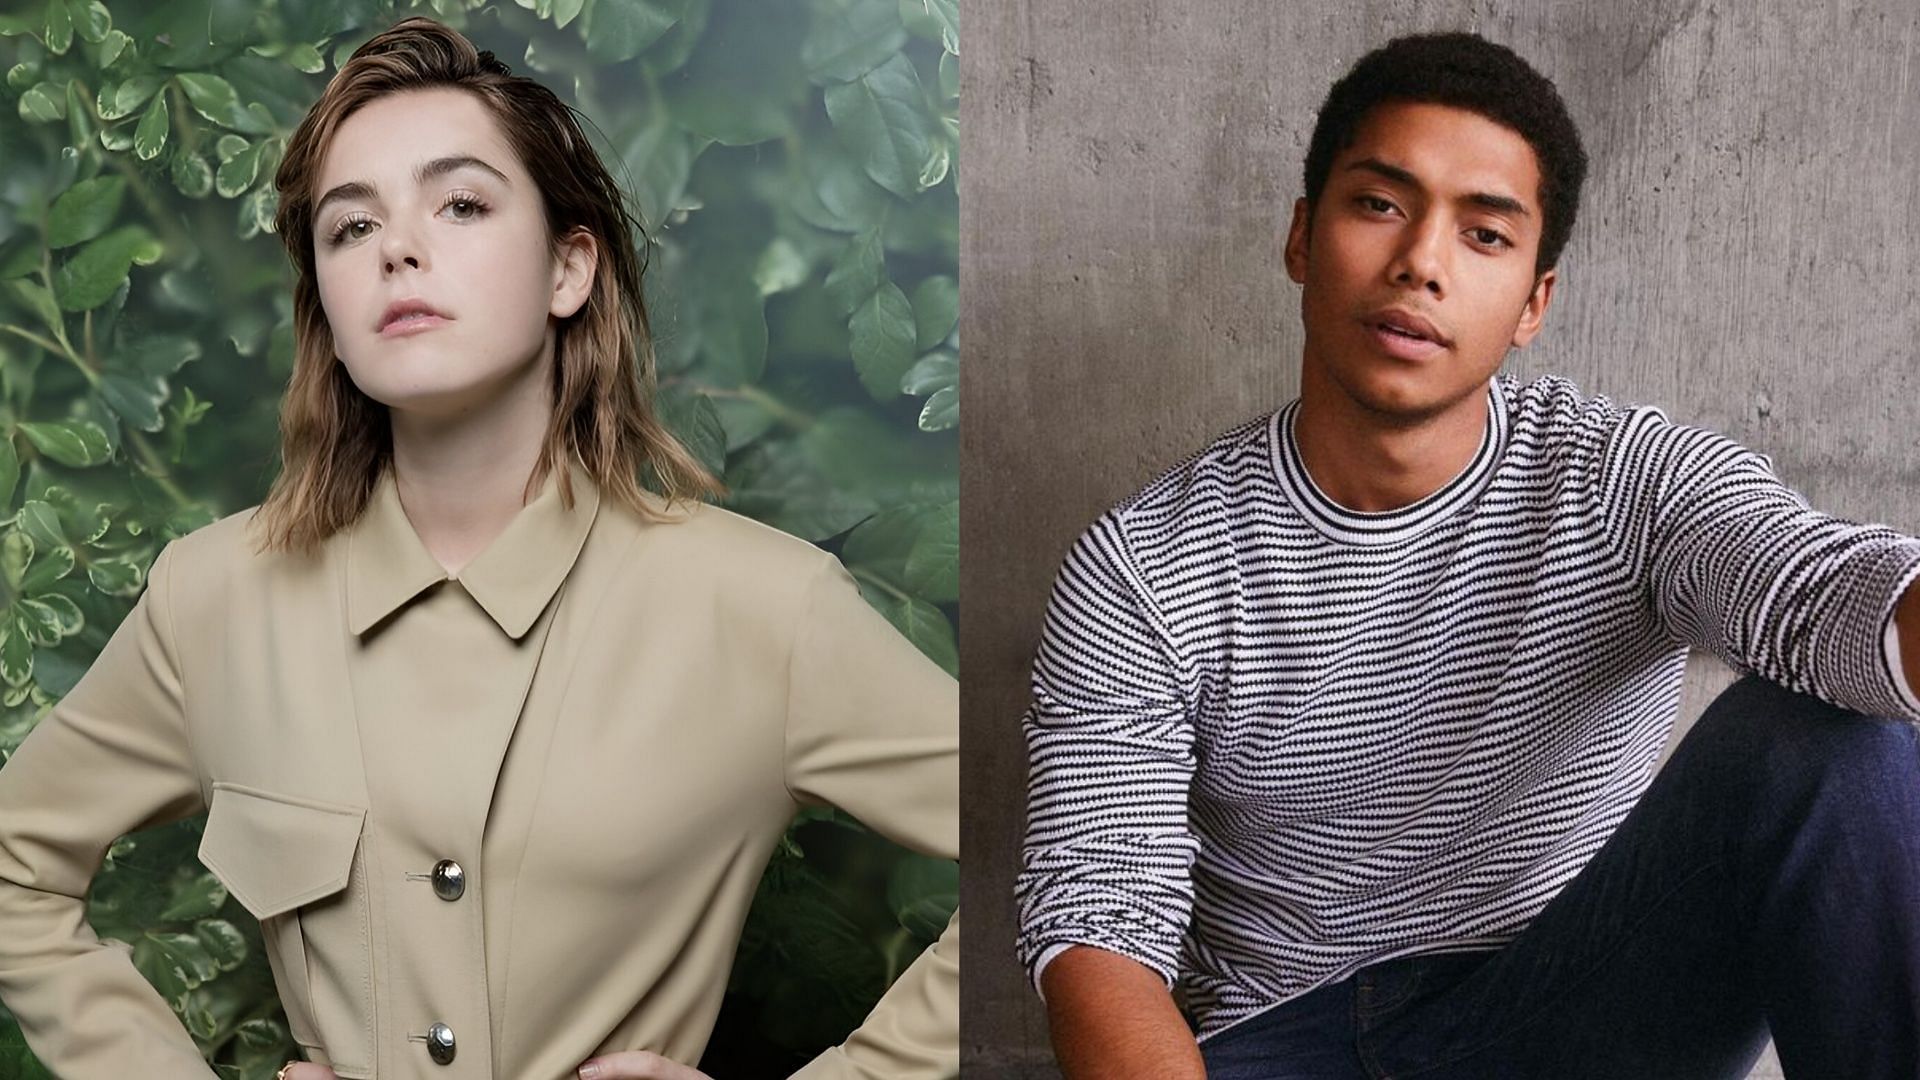 Kiernan Shipka pays tribute to co-star Chance Perdomo from Chilling Adventures of Sabrina. (Image via Instagram 